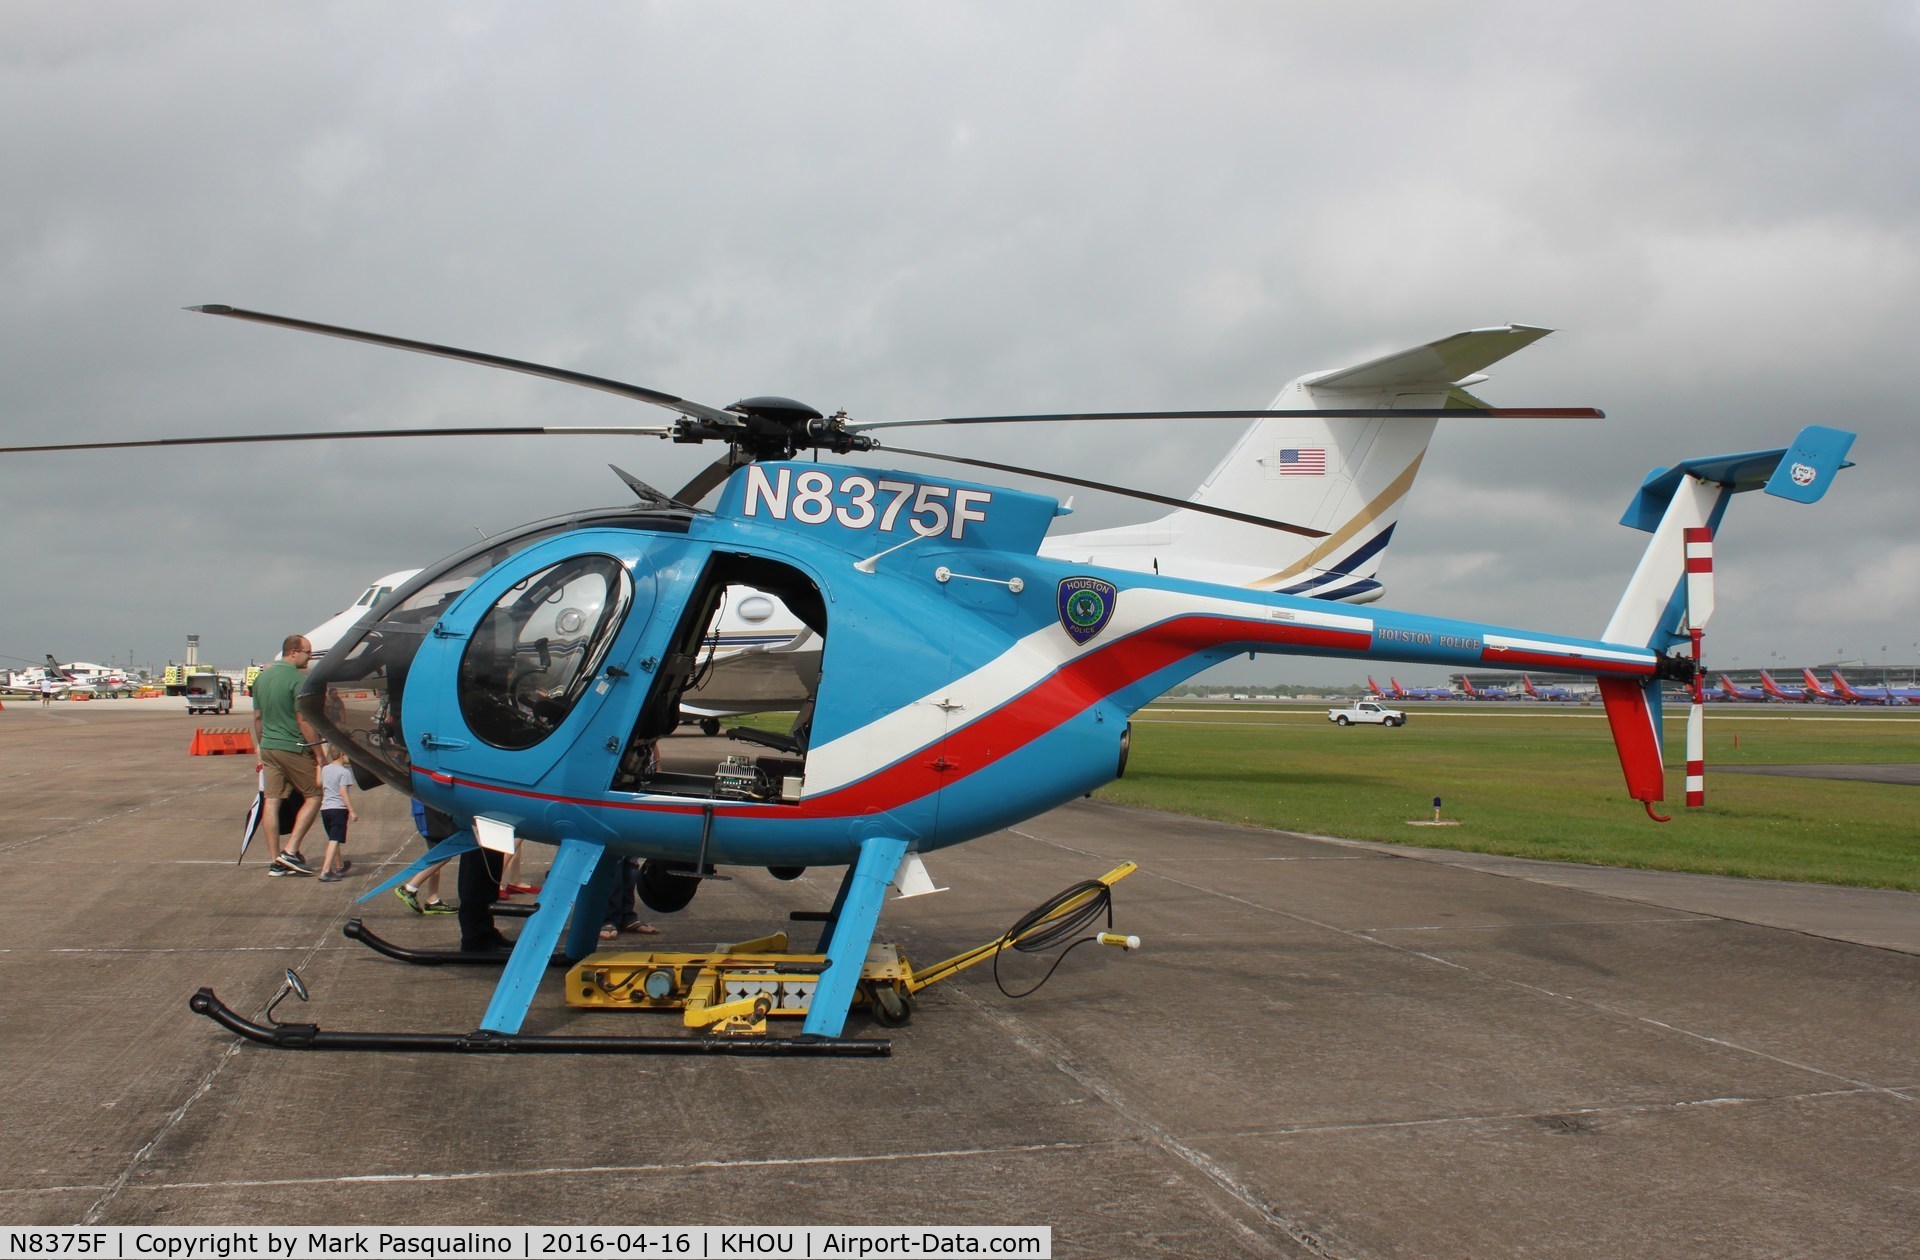 N8375F, MD Helicopters 369E C/N 0586E, MD Helicopters 469E